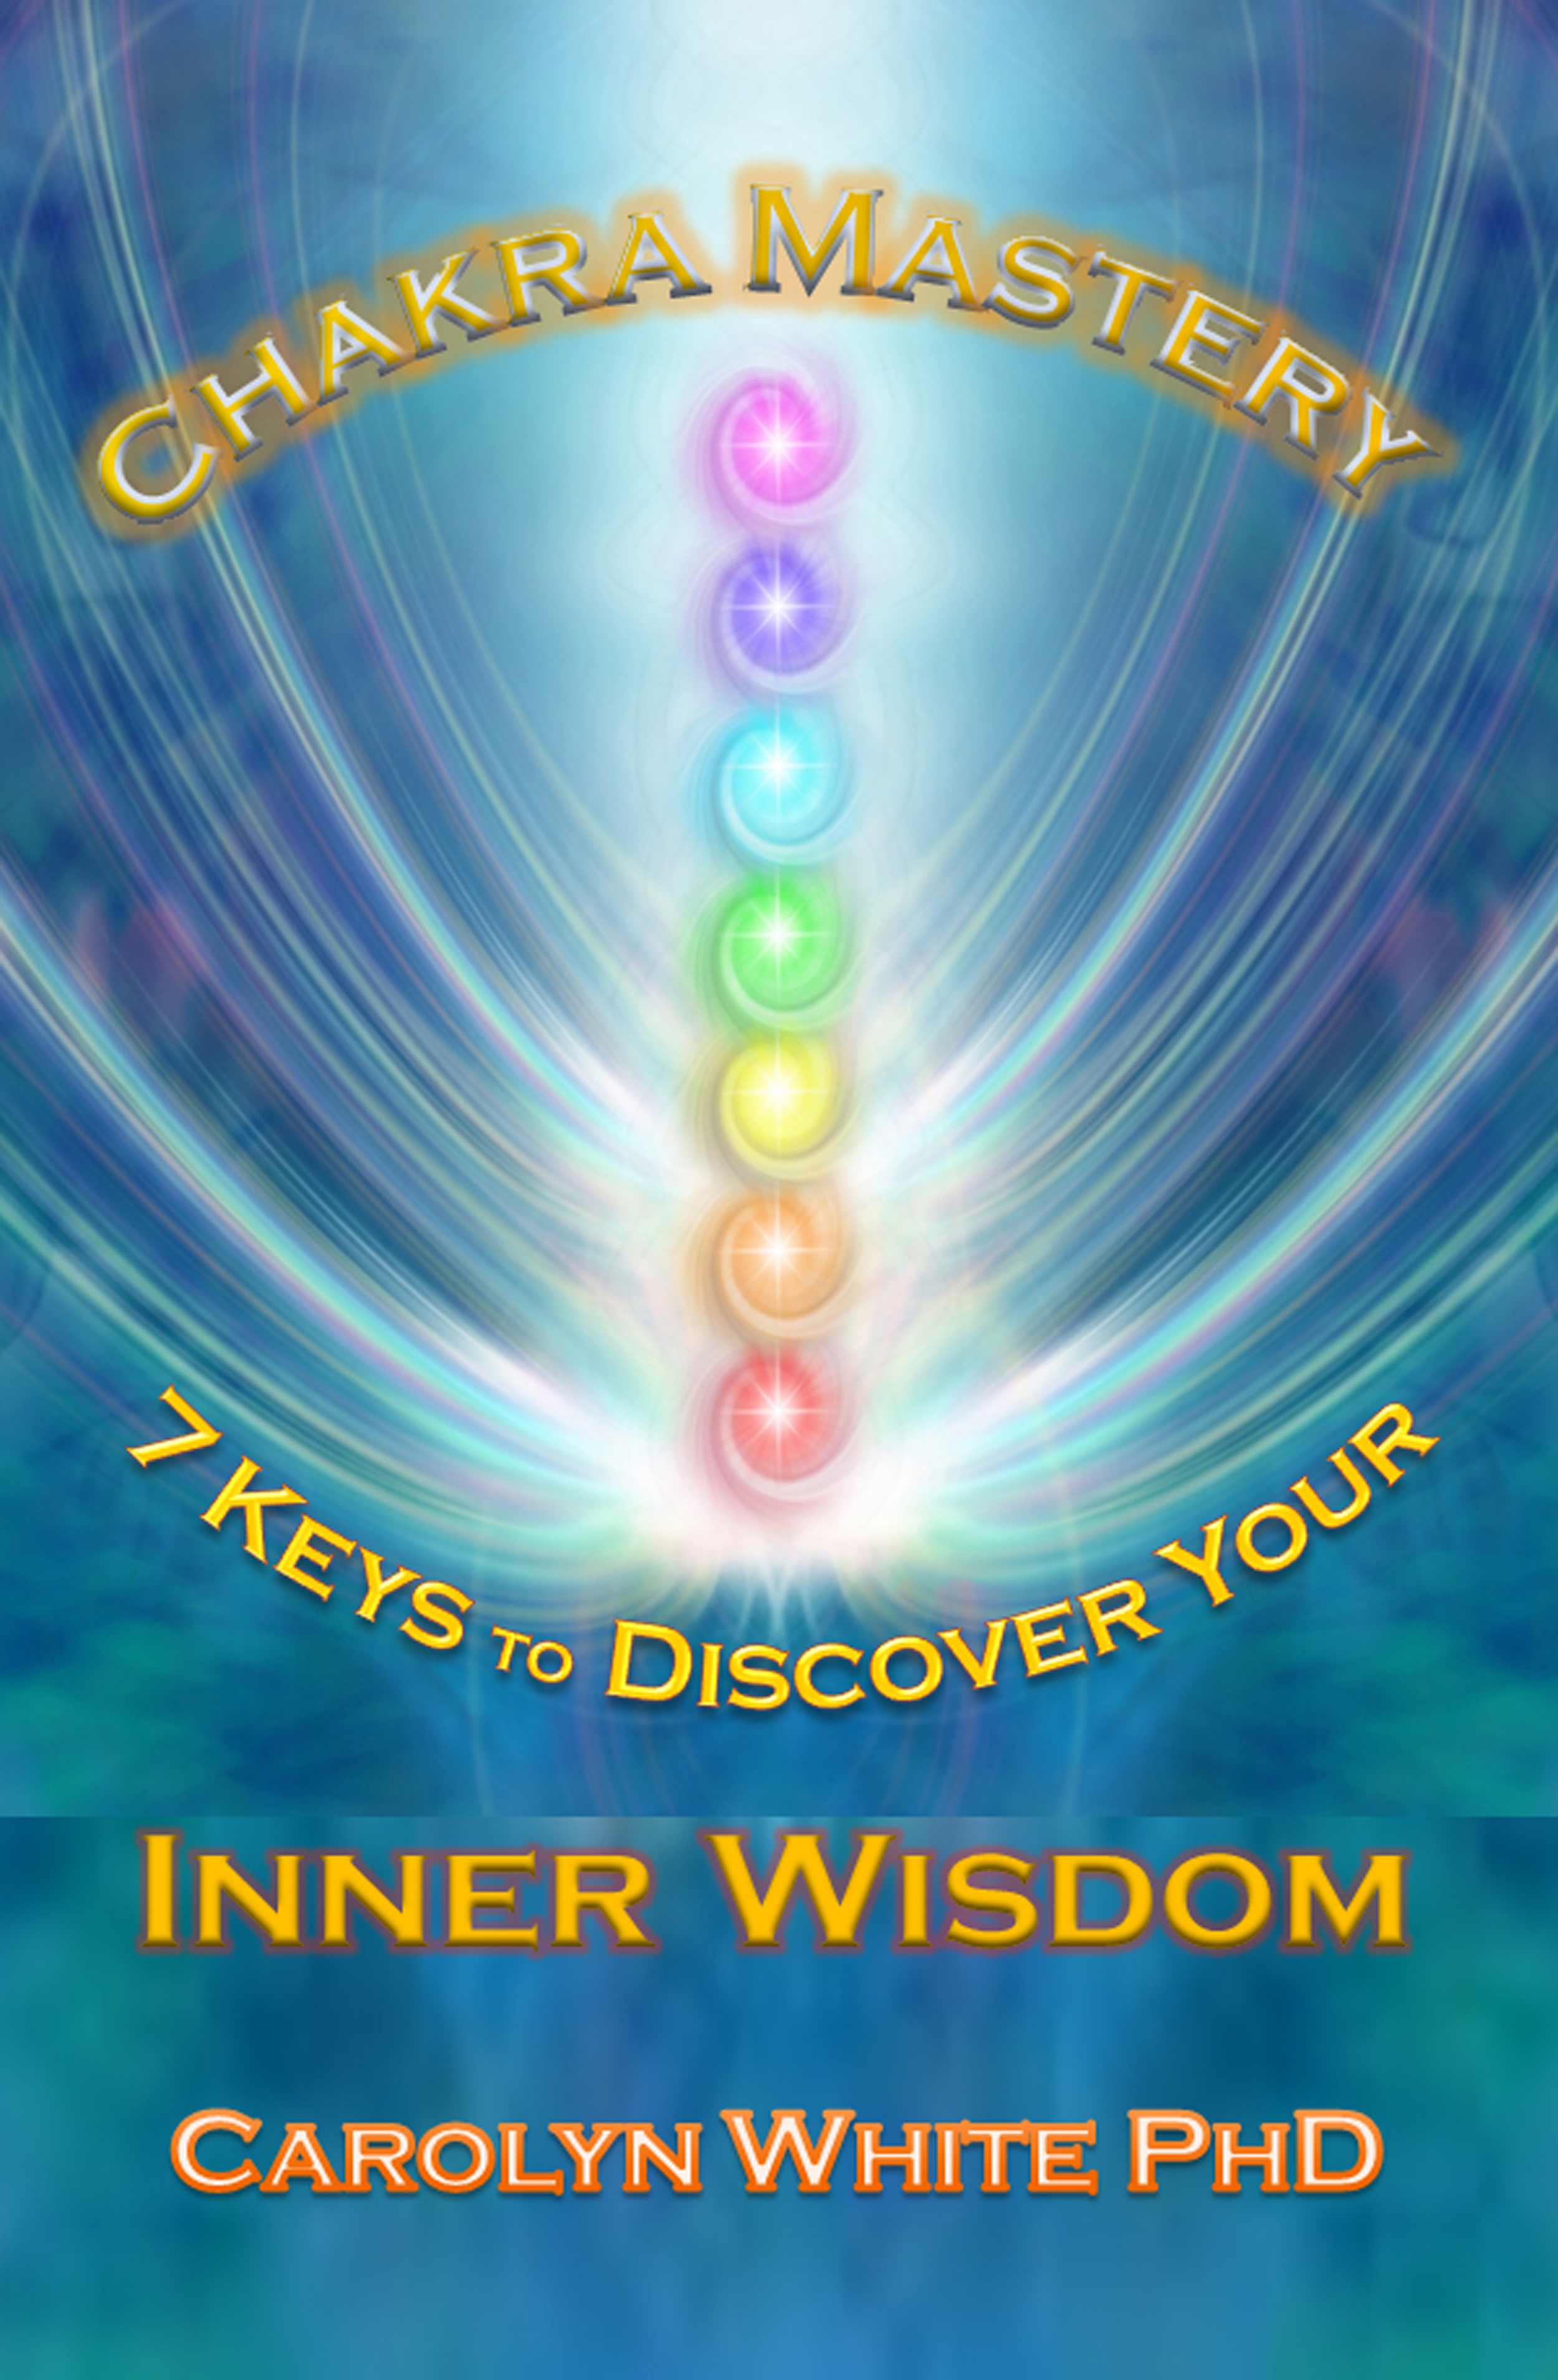 Chakra Mastery 7 Keys to Discover Your Innger Wisdom